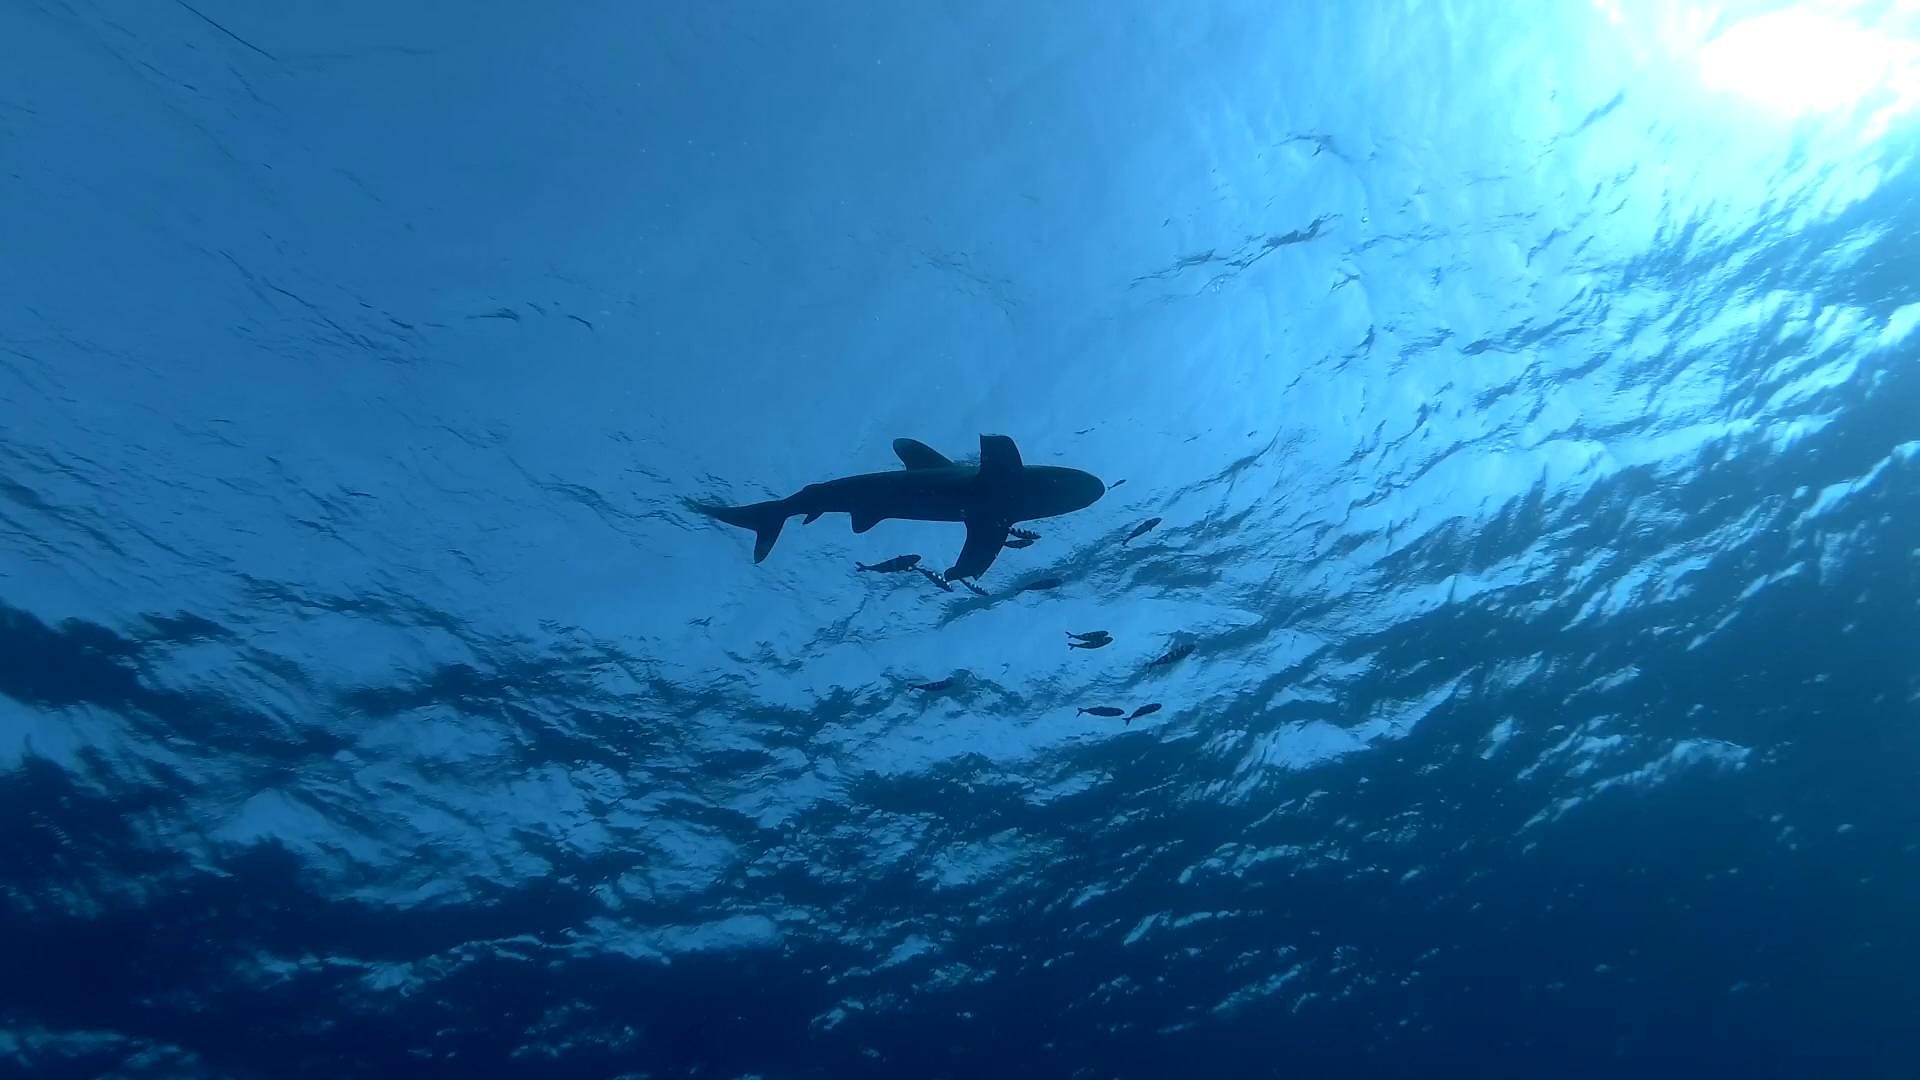 The real reasons why sharks attack humans